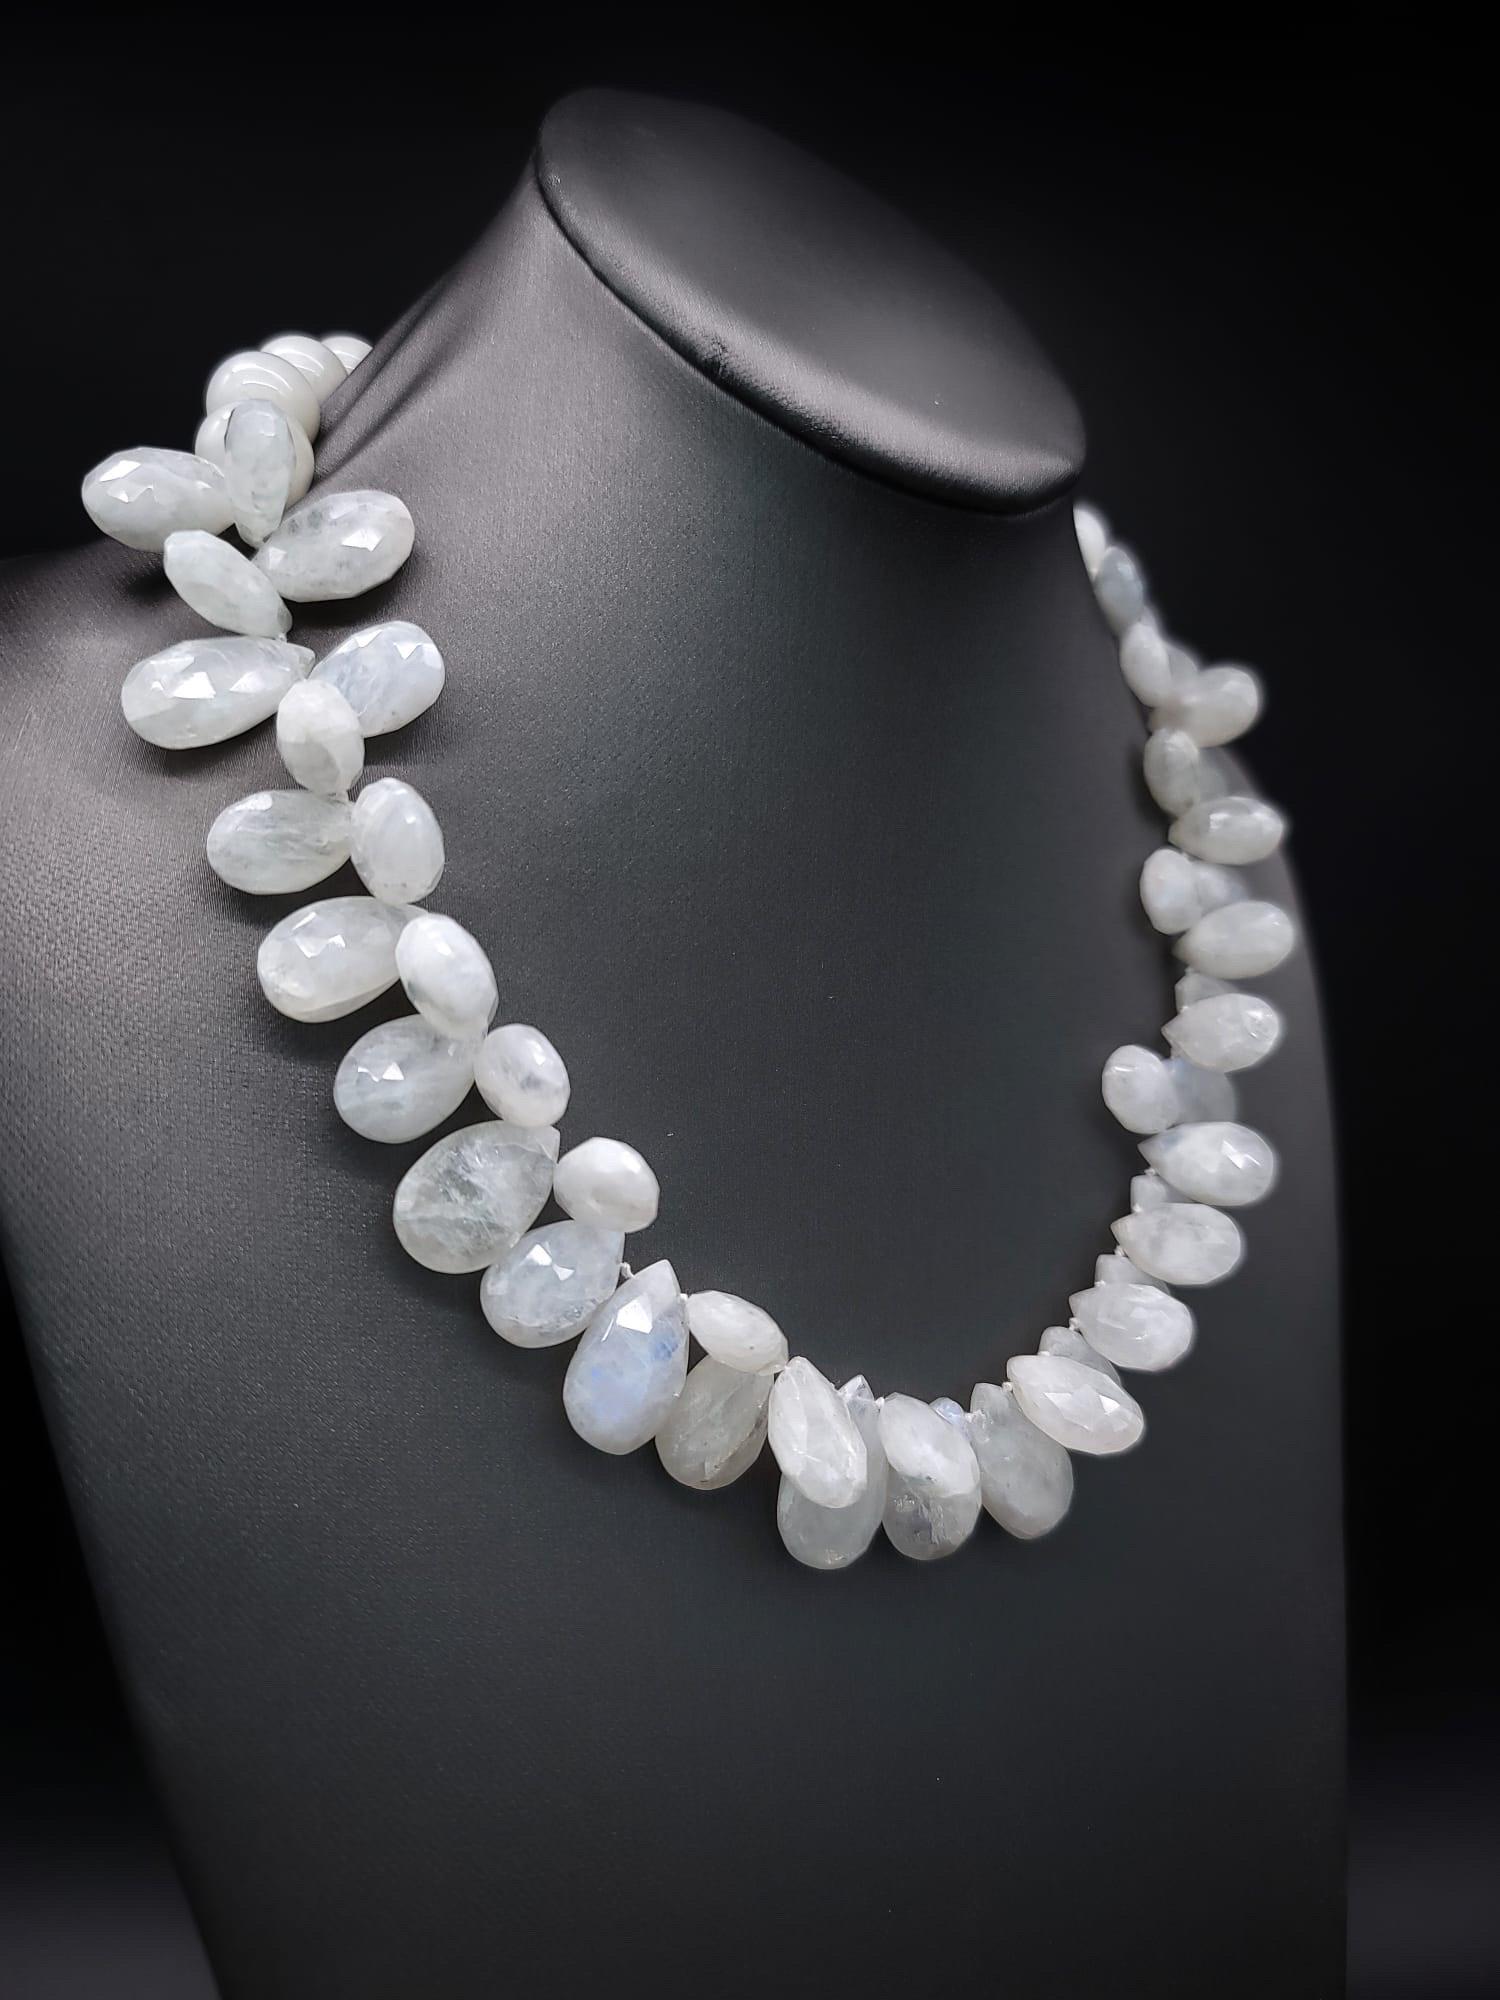 Mixed Cut A.Jeschel Exquisite Faceted Moonstone necklace. For Sale